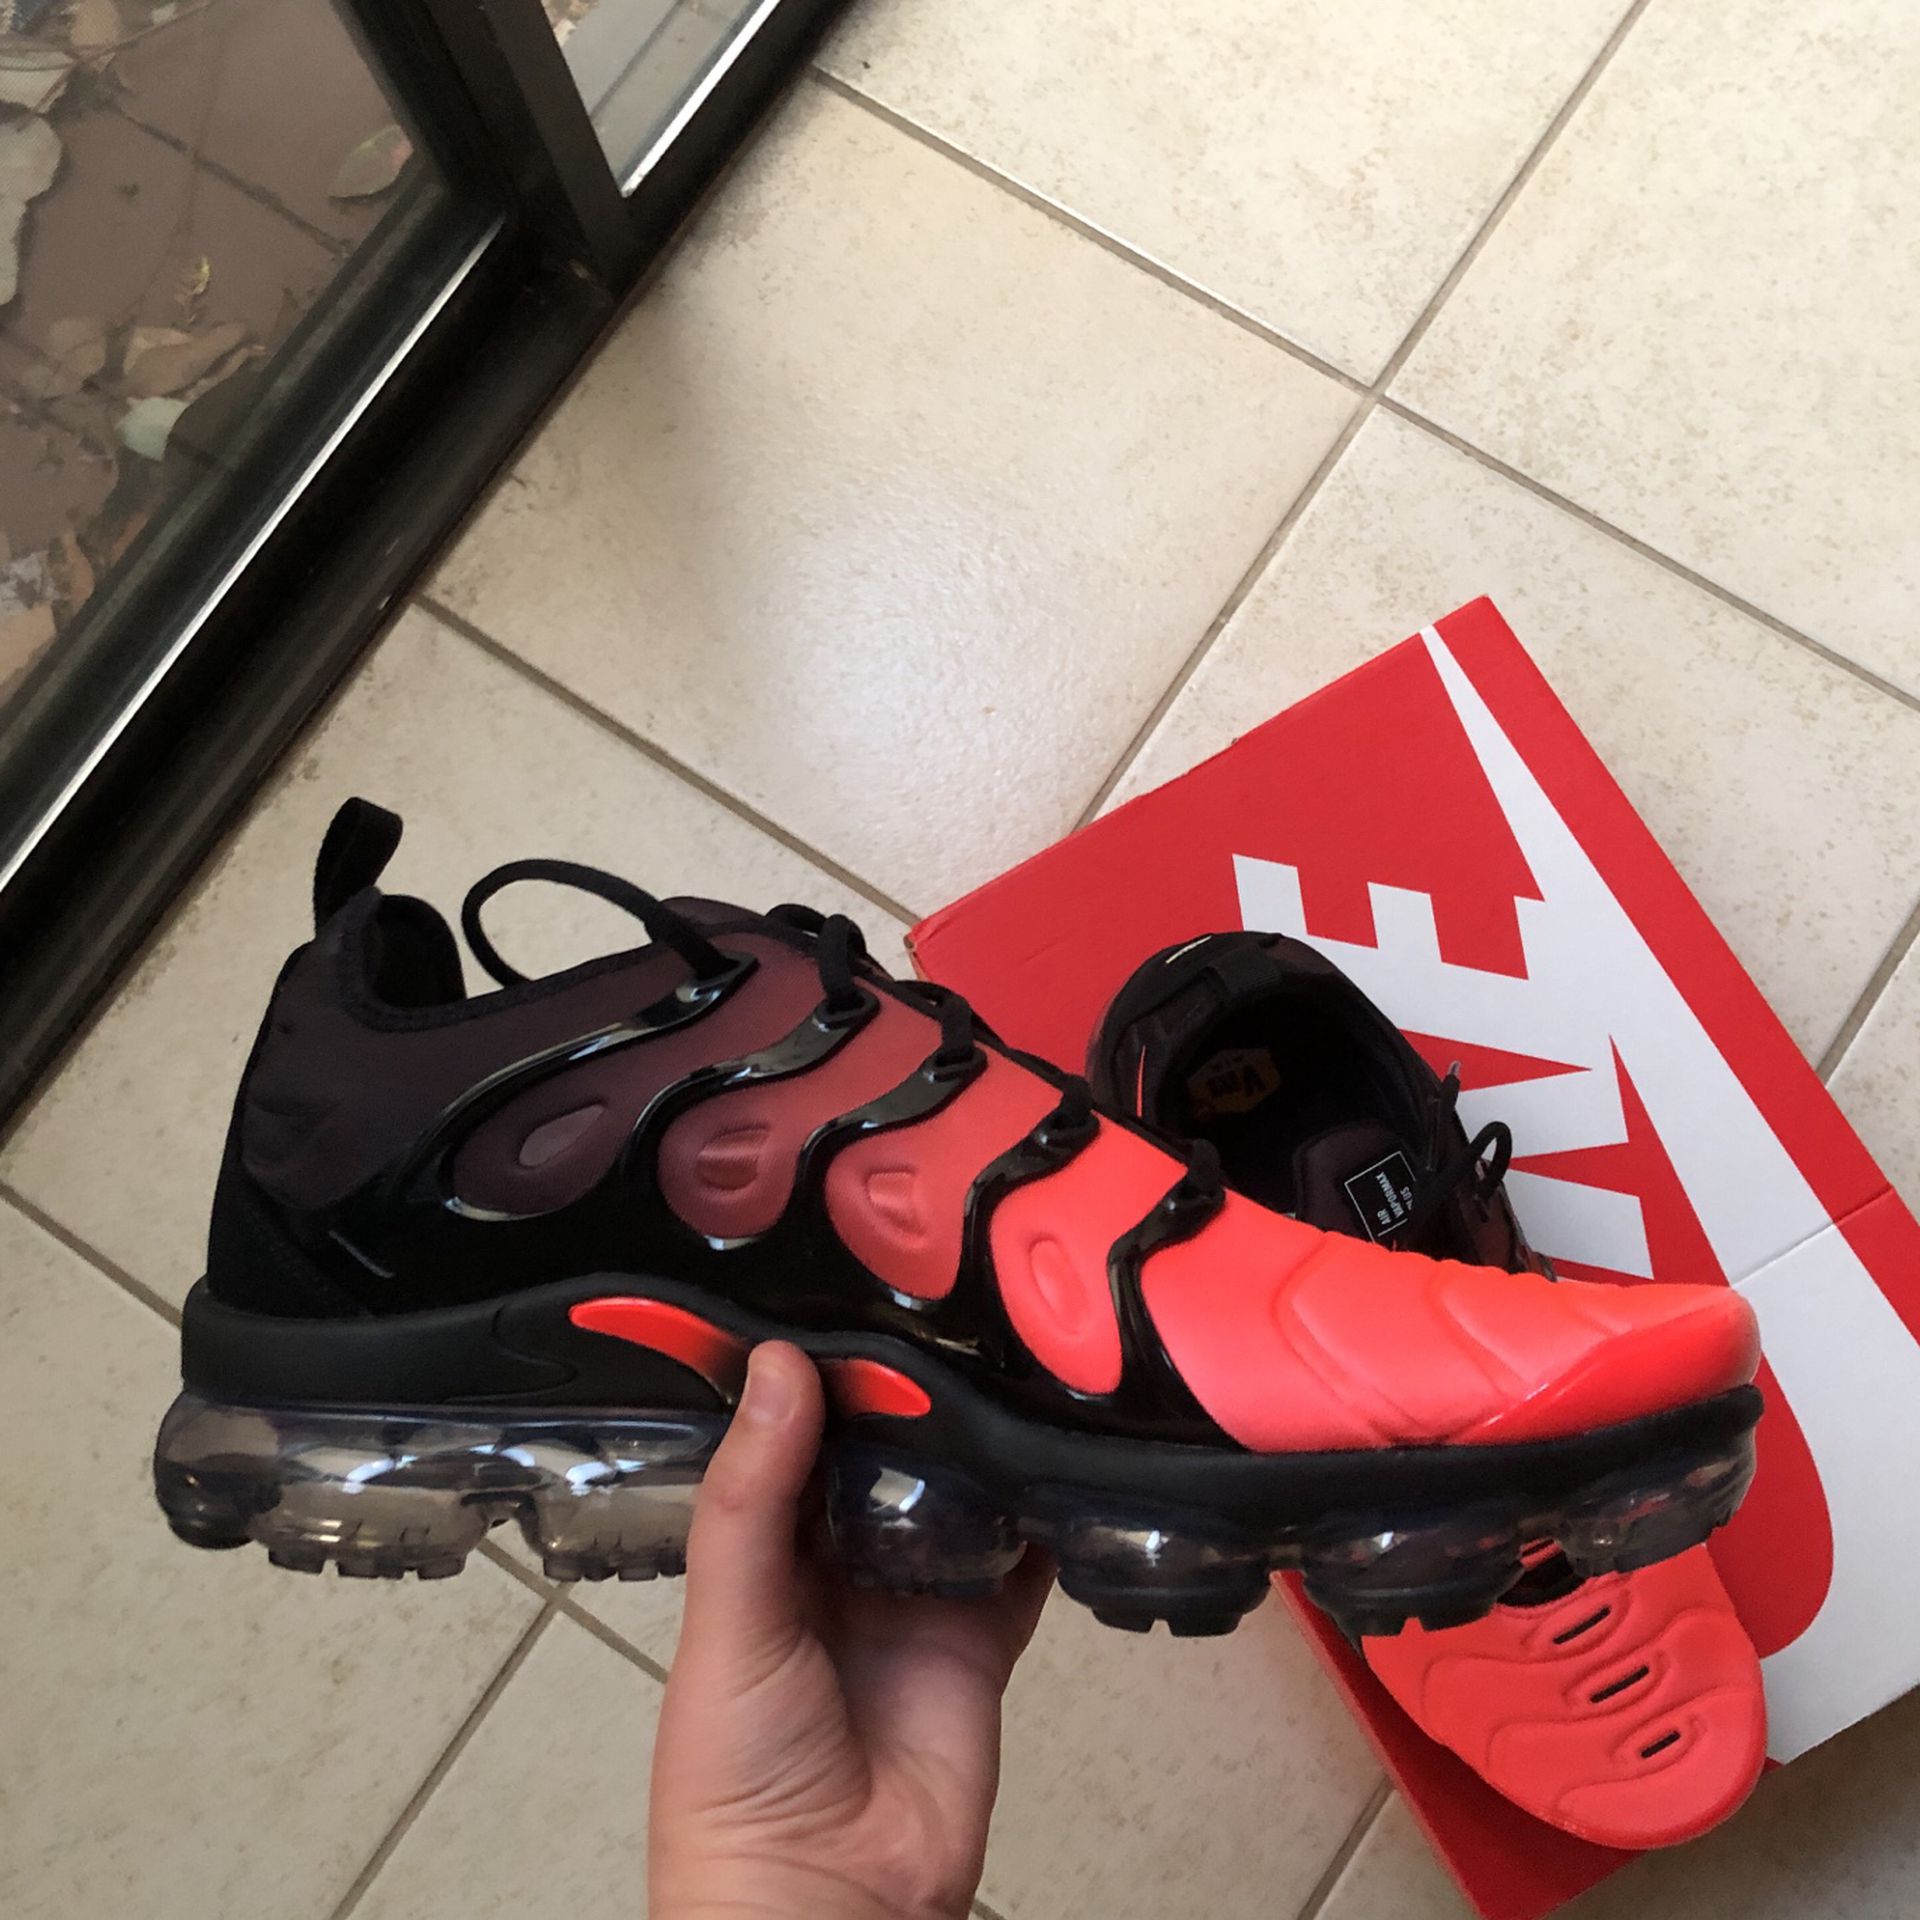 Brand New Nike Air Vapormax Plus Black And Bright Crimson Color Way Size 12 for Sale in Danville, CA - OfferUp